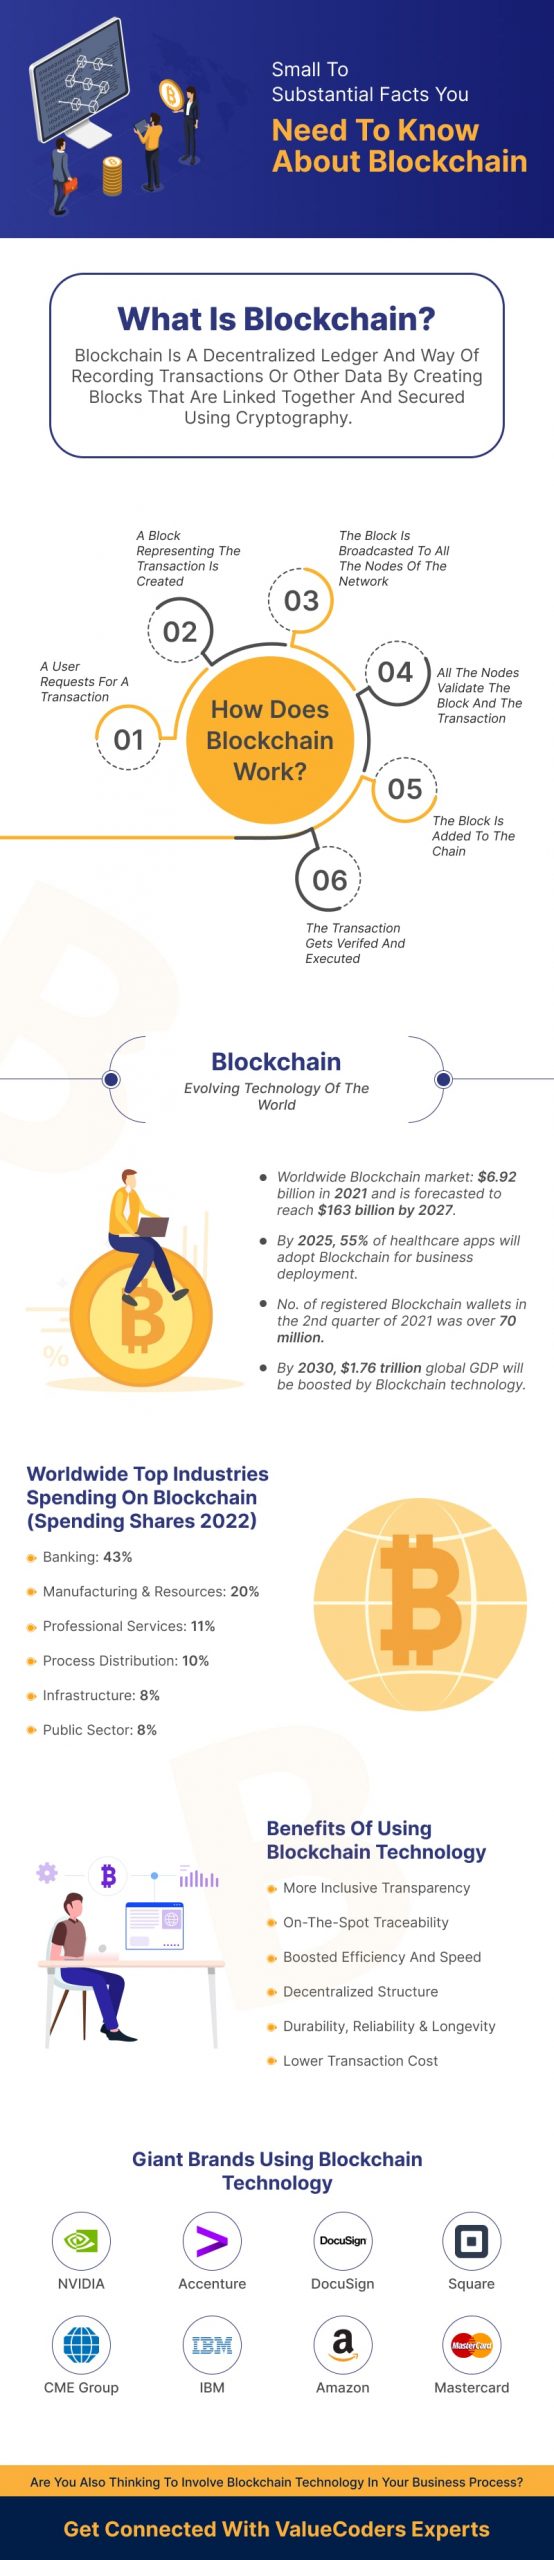 Small To Substantial Facts You Need to Know About Blockchain [Infographic]